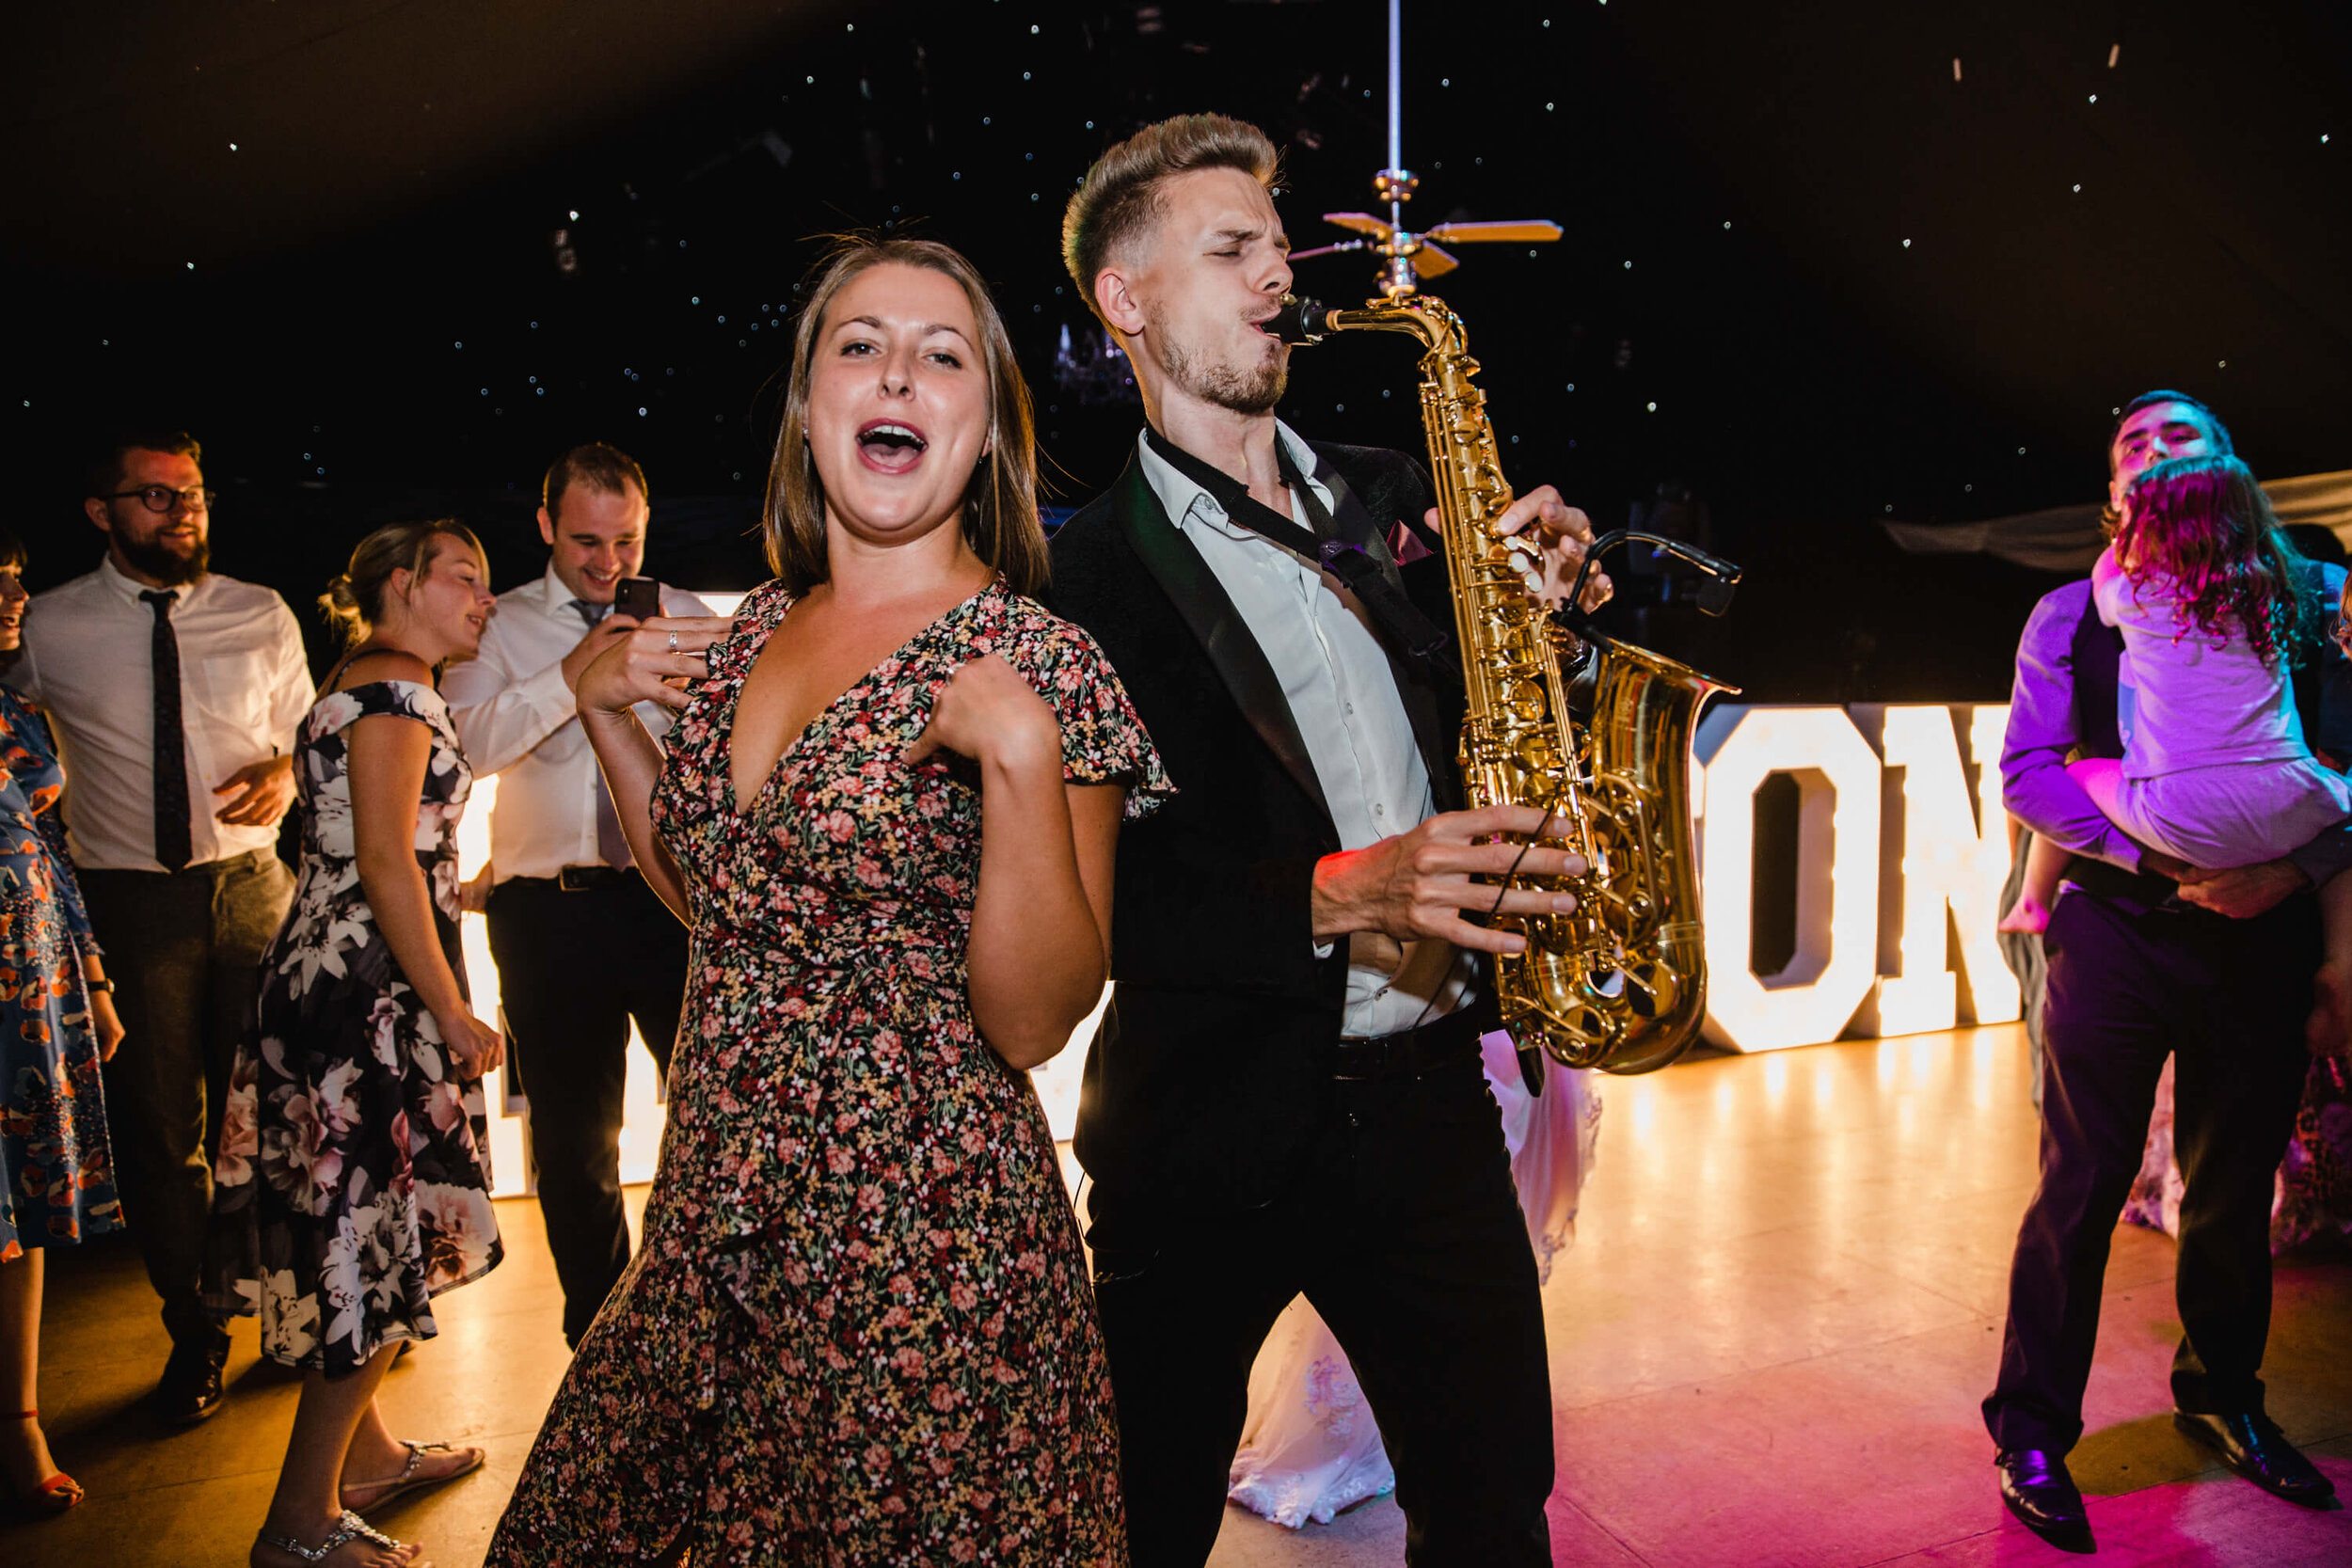 natural moment captured as wedding guest dances with saxophone player